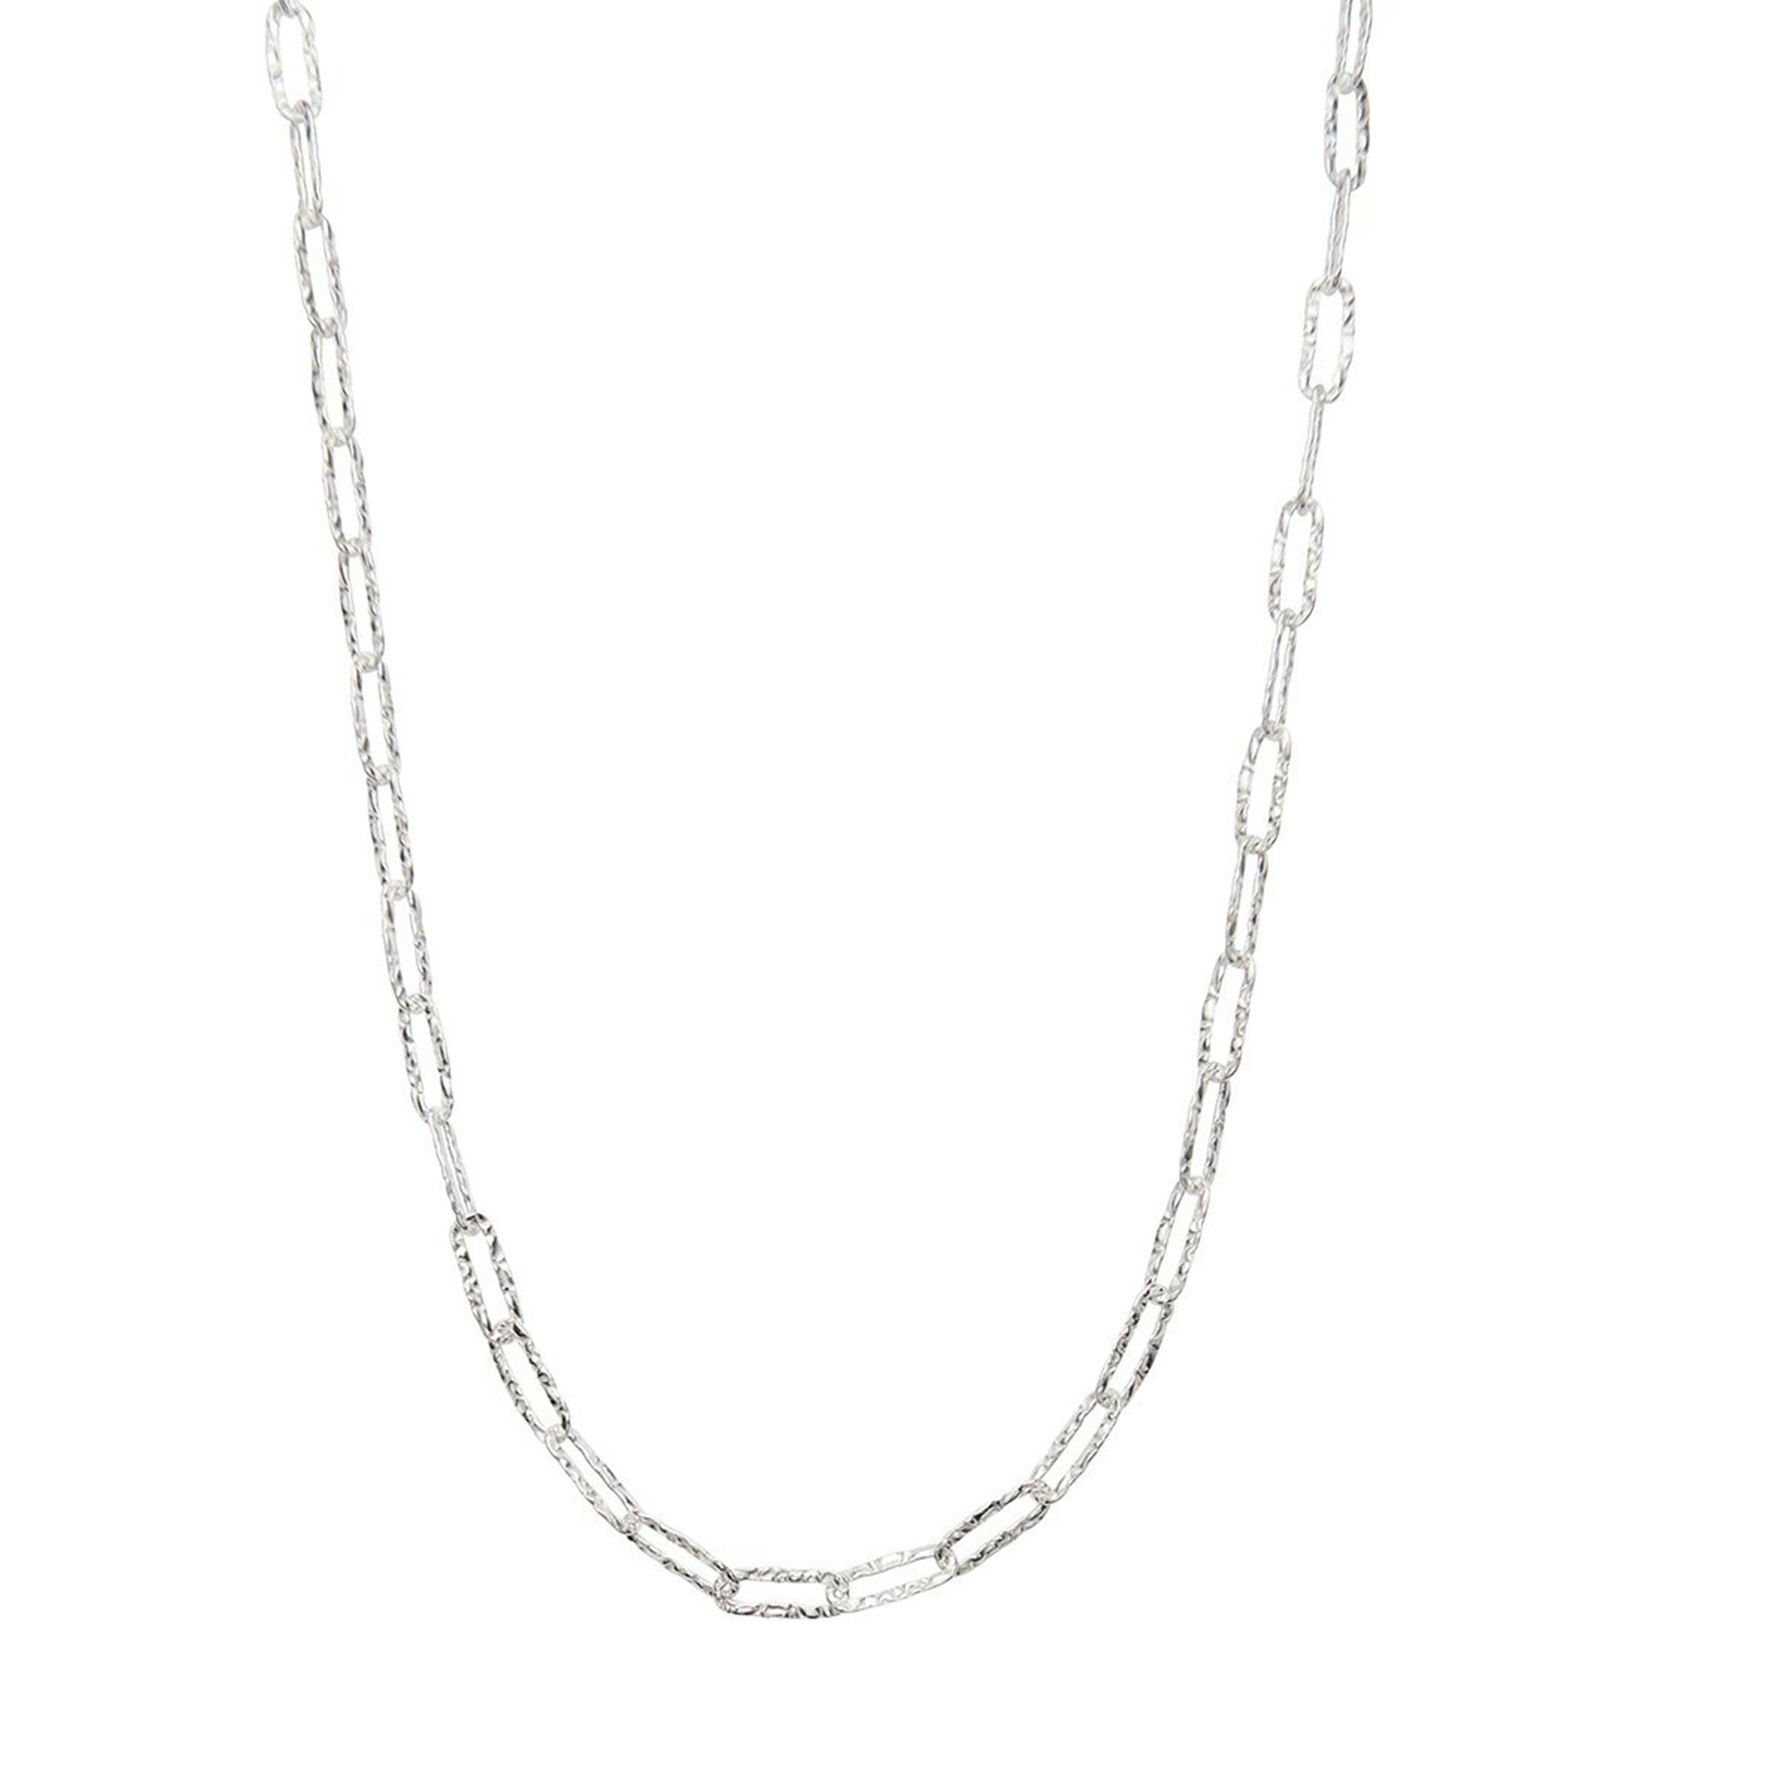 Ginny Necklace from Pico in Silver Sterling 925